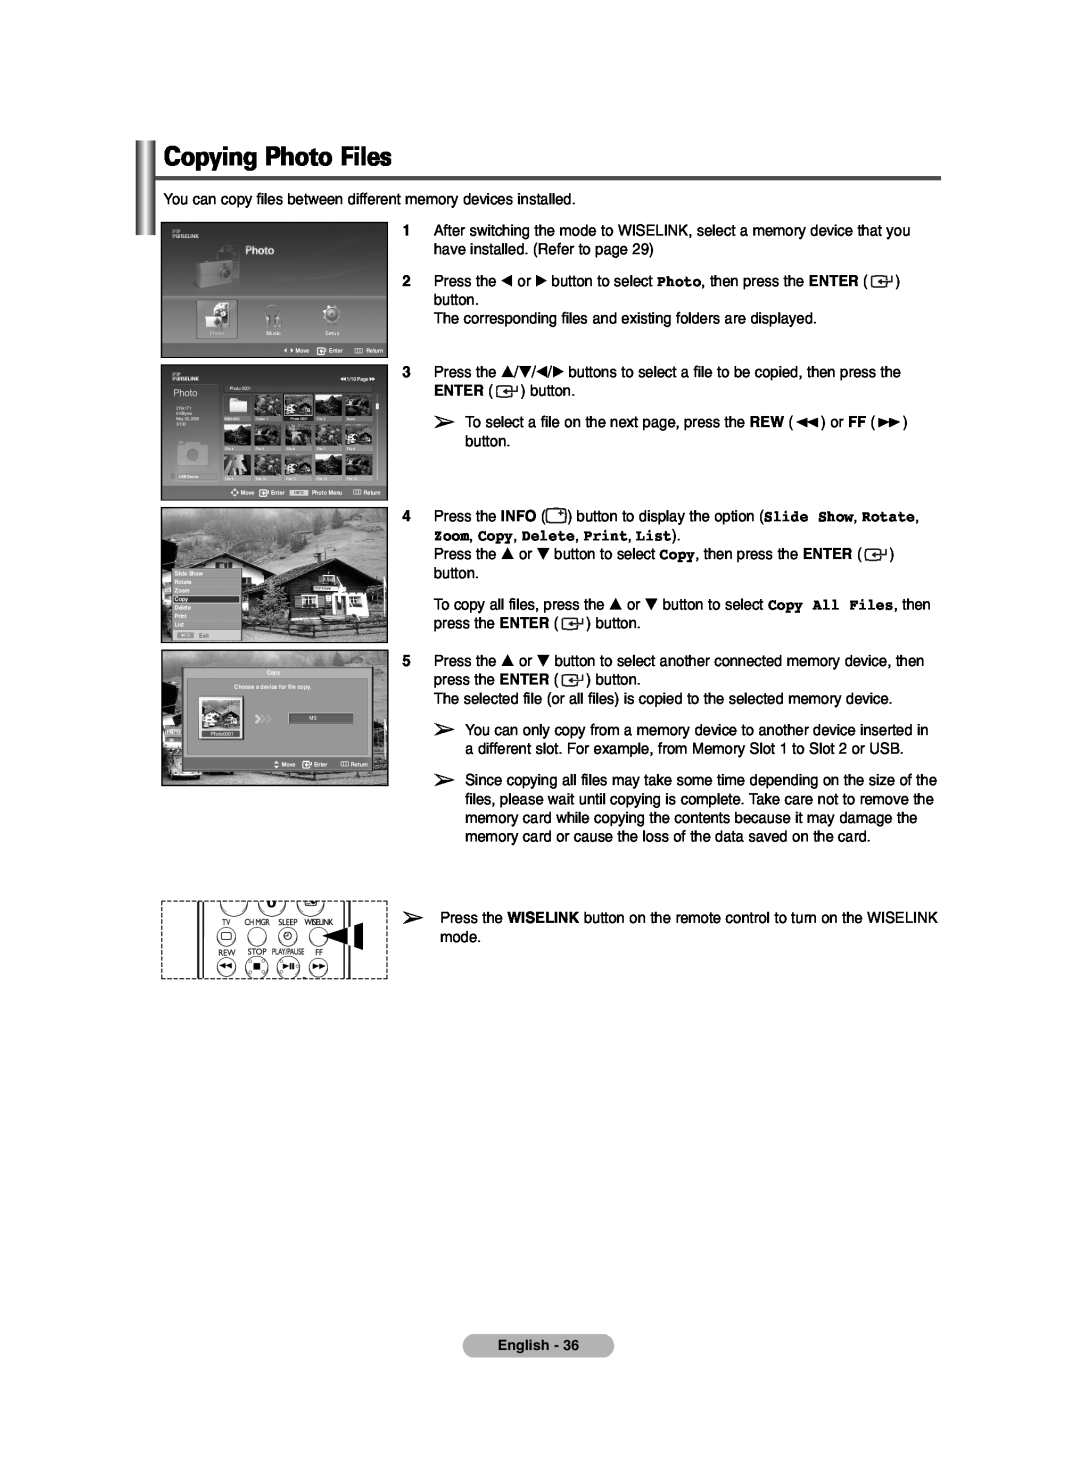 Samsung PDP-TELEVISION manual Copying Photo Files, Zoom, Copy, Delete, Print, List 